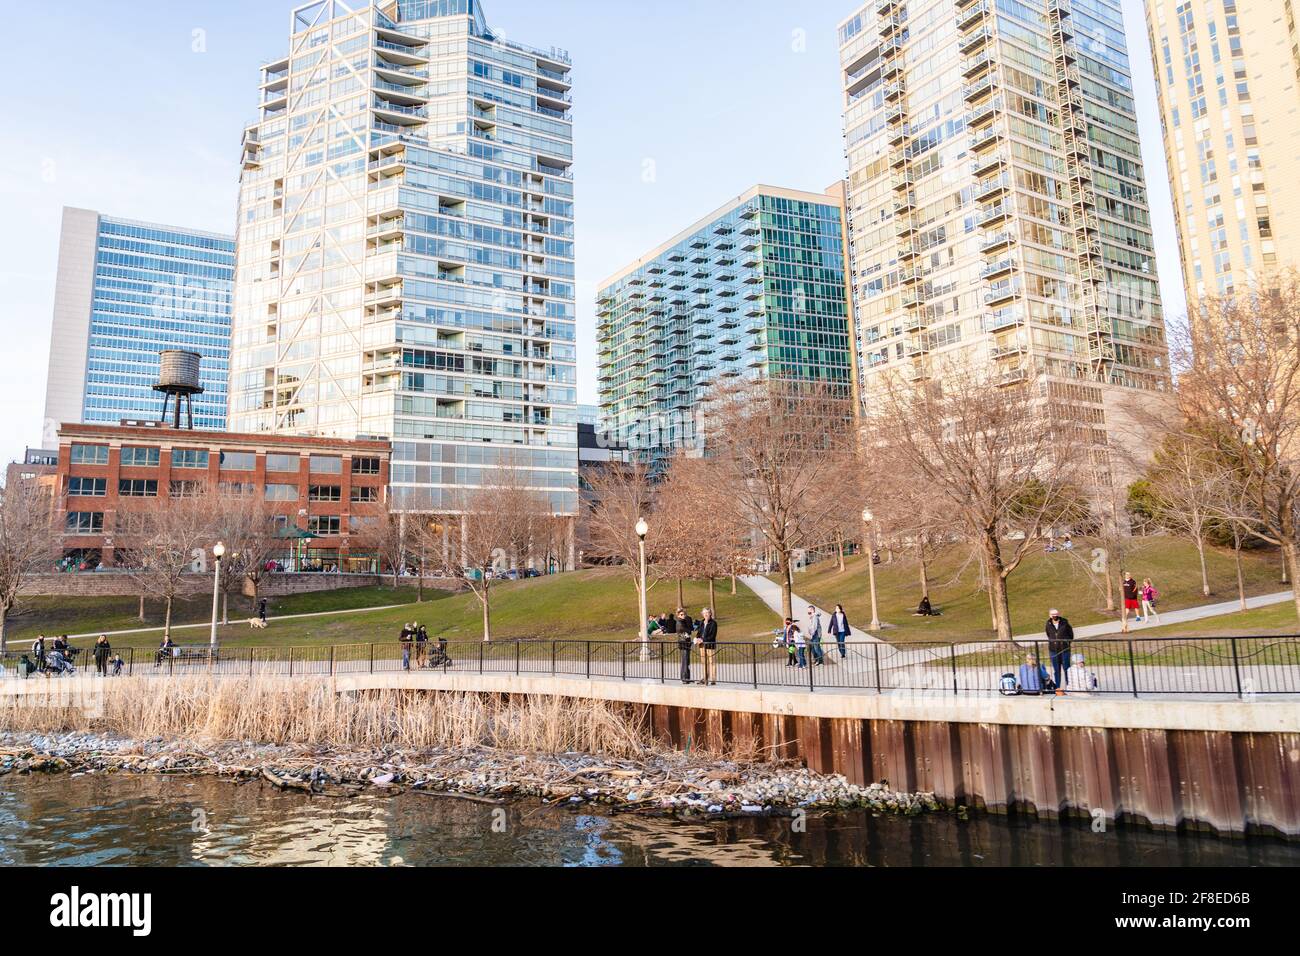 Chicago, Illinois - March 13, 2021: Waterfront Residential Luxury Buildings in Downtown Chicago During the COVID-19 Pandemic. Stock Photo